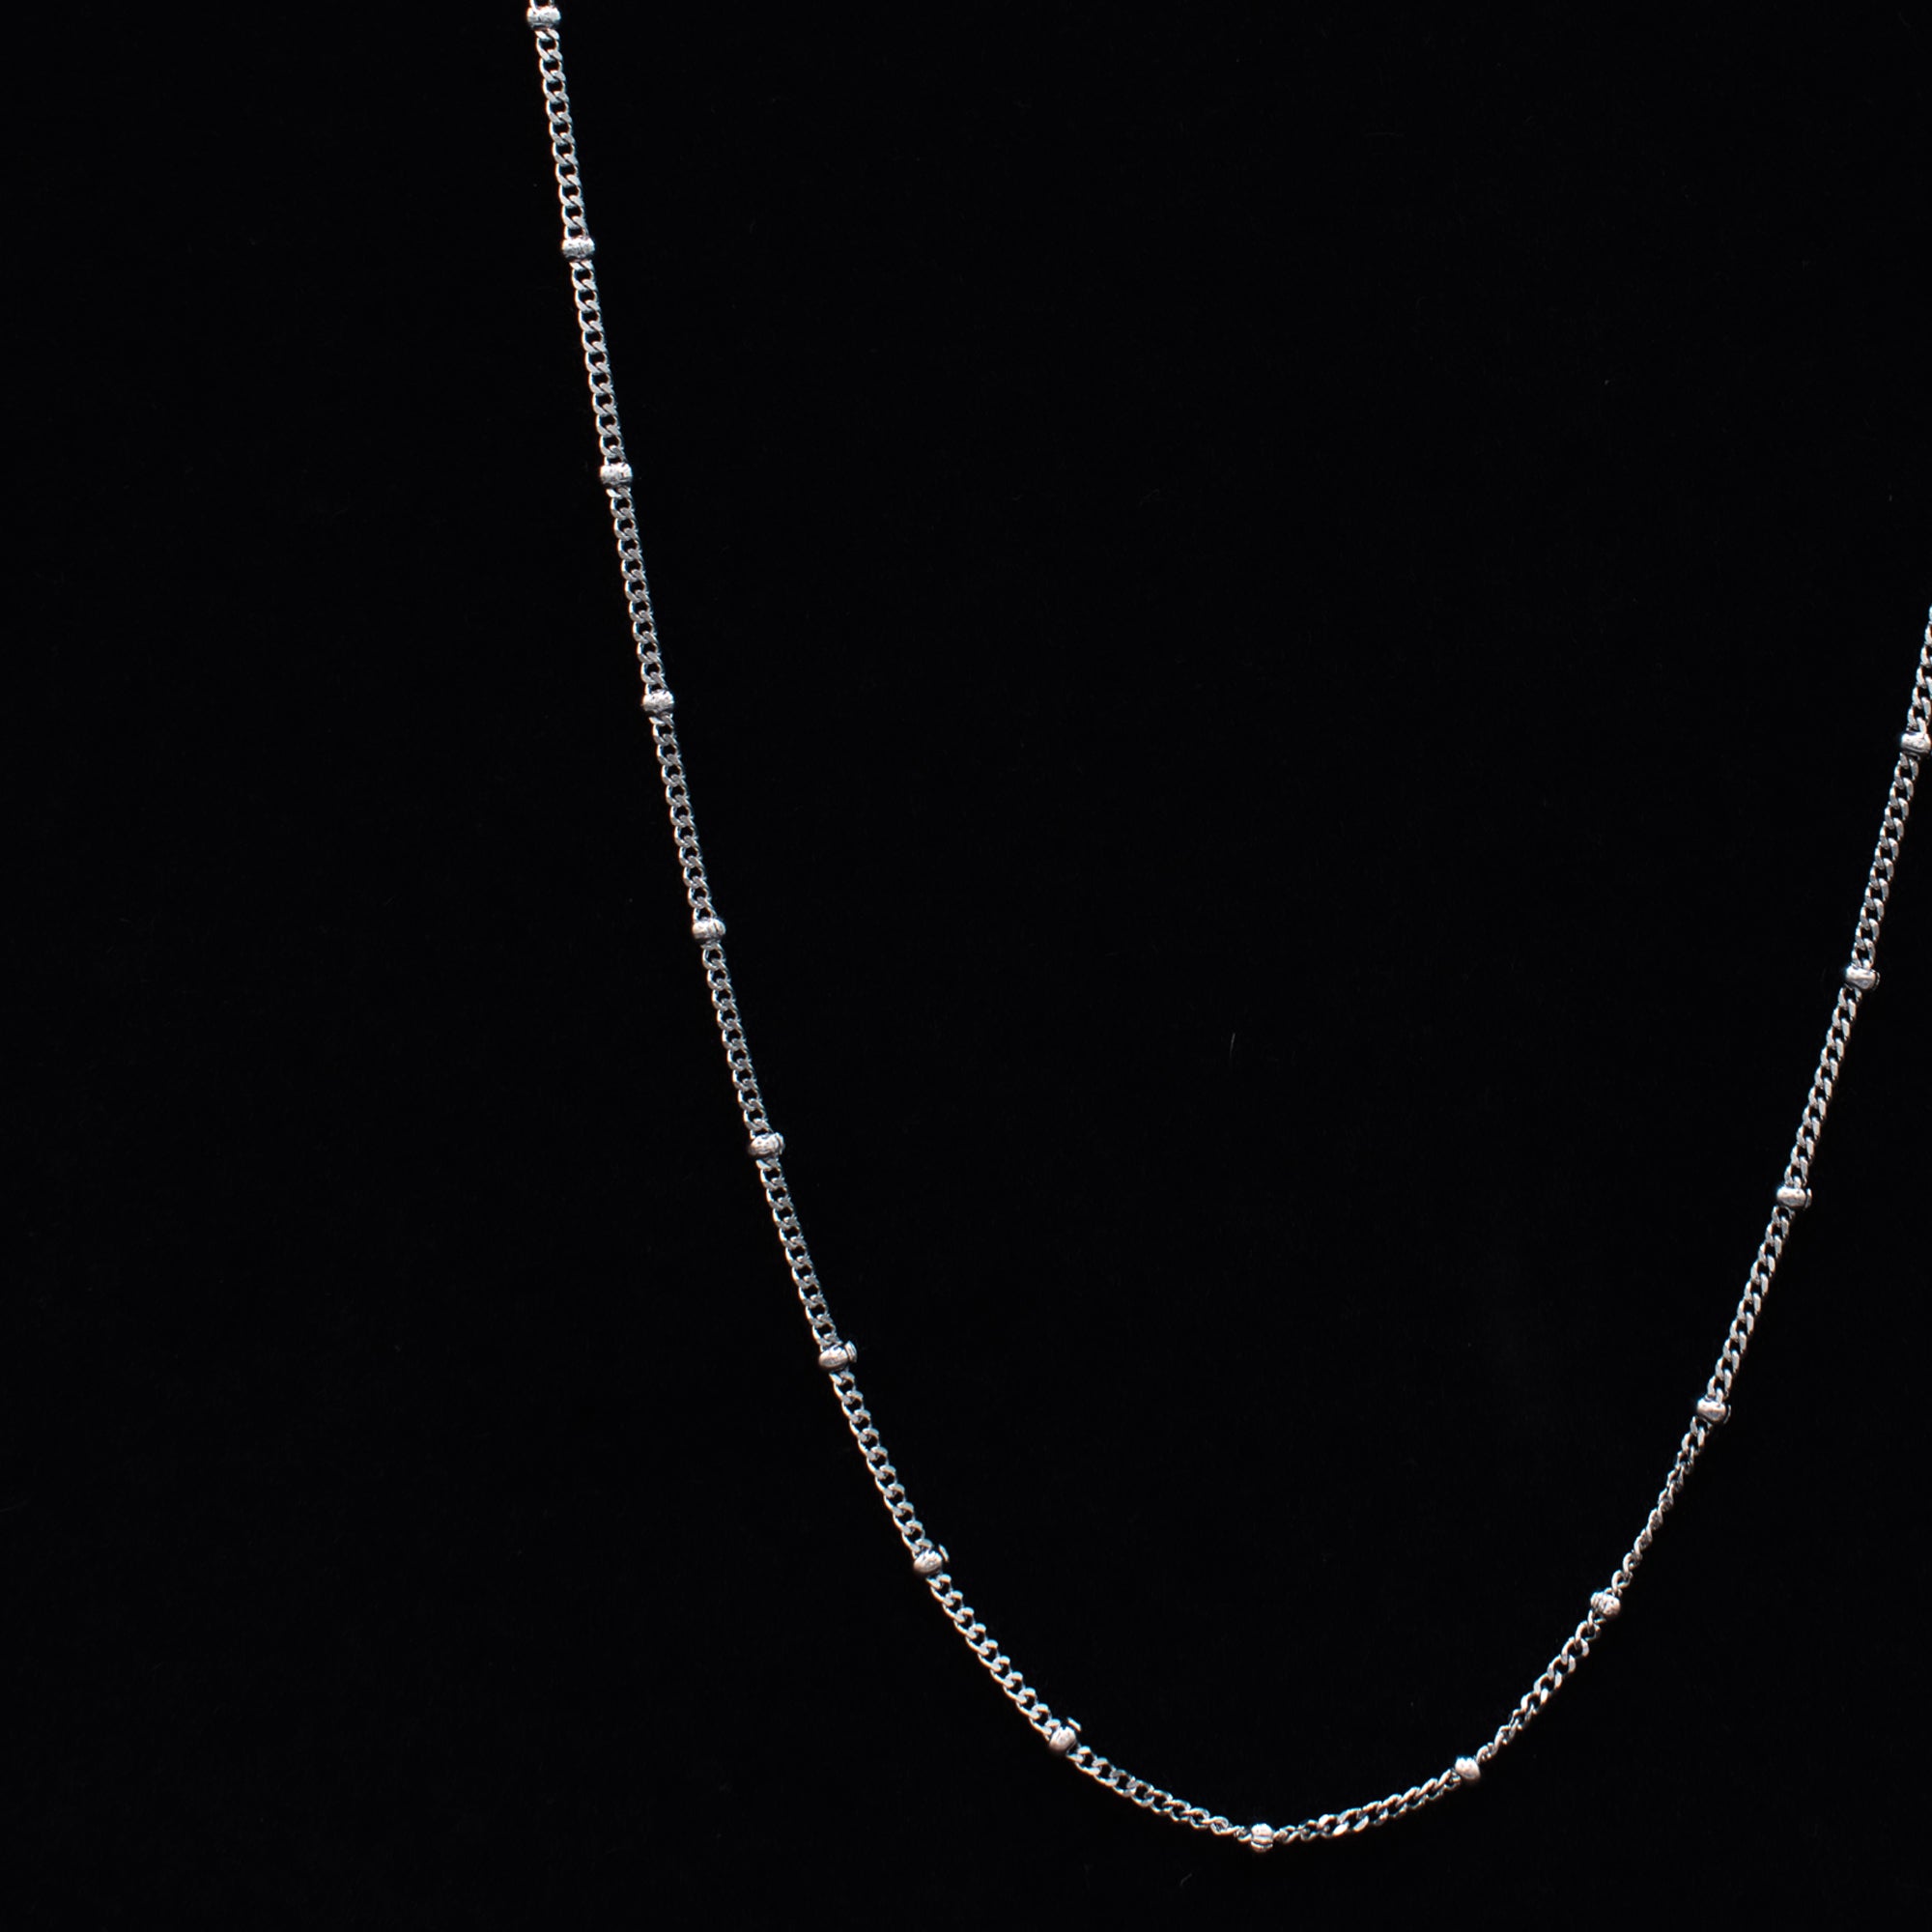 Cuban Satellite Chain Necklace - (Silver) 2mm